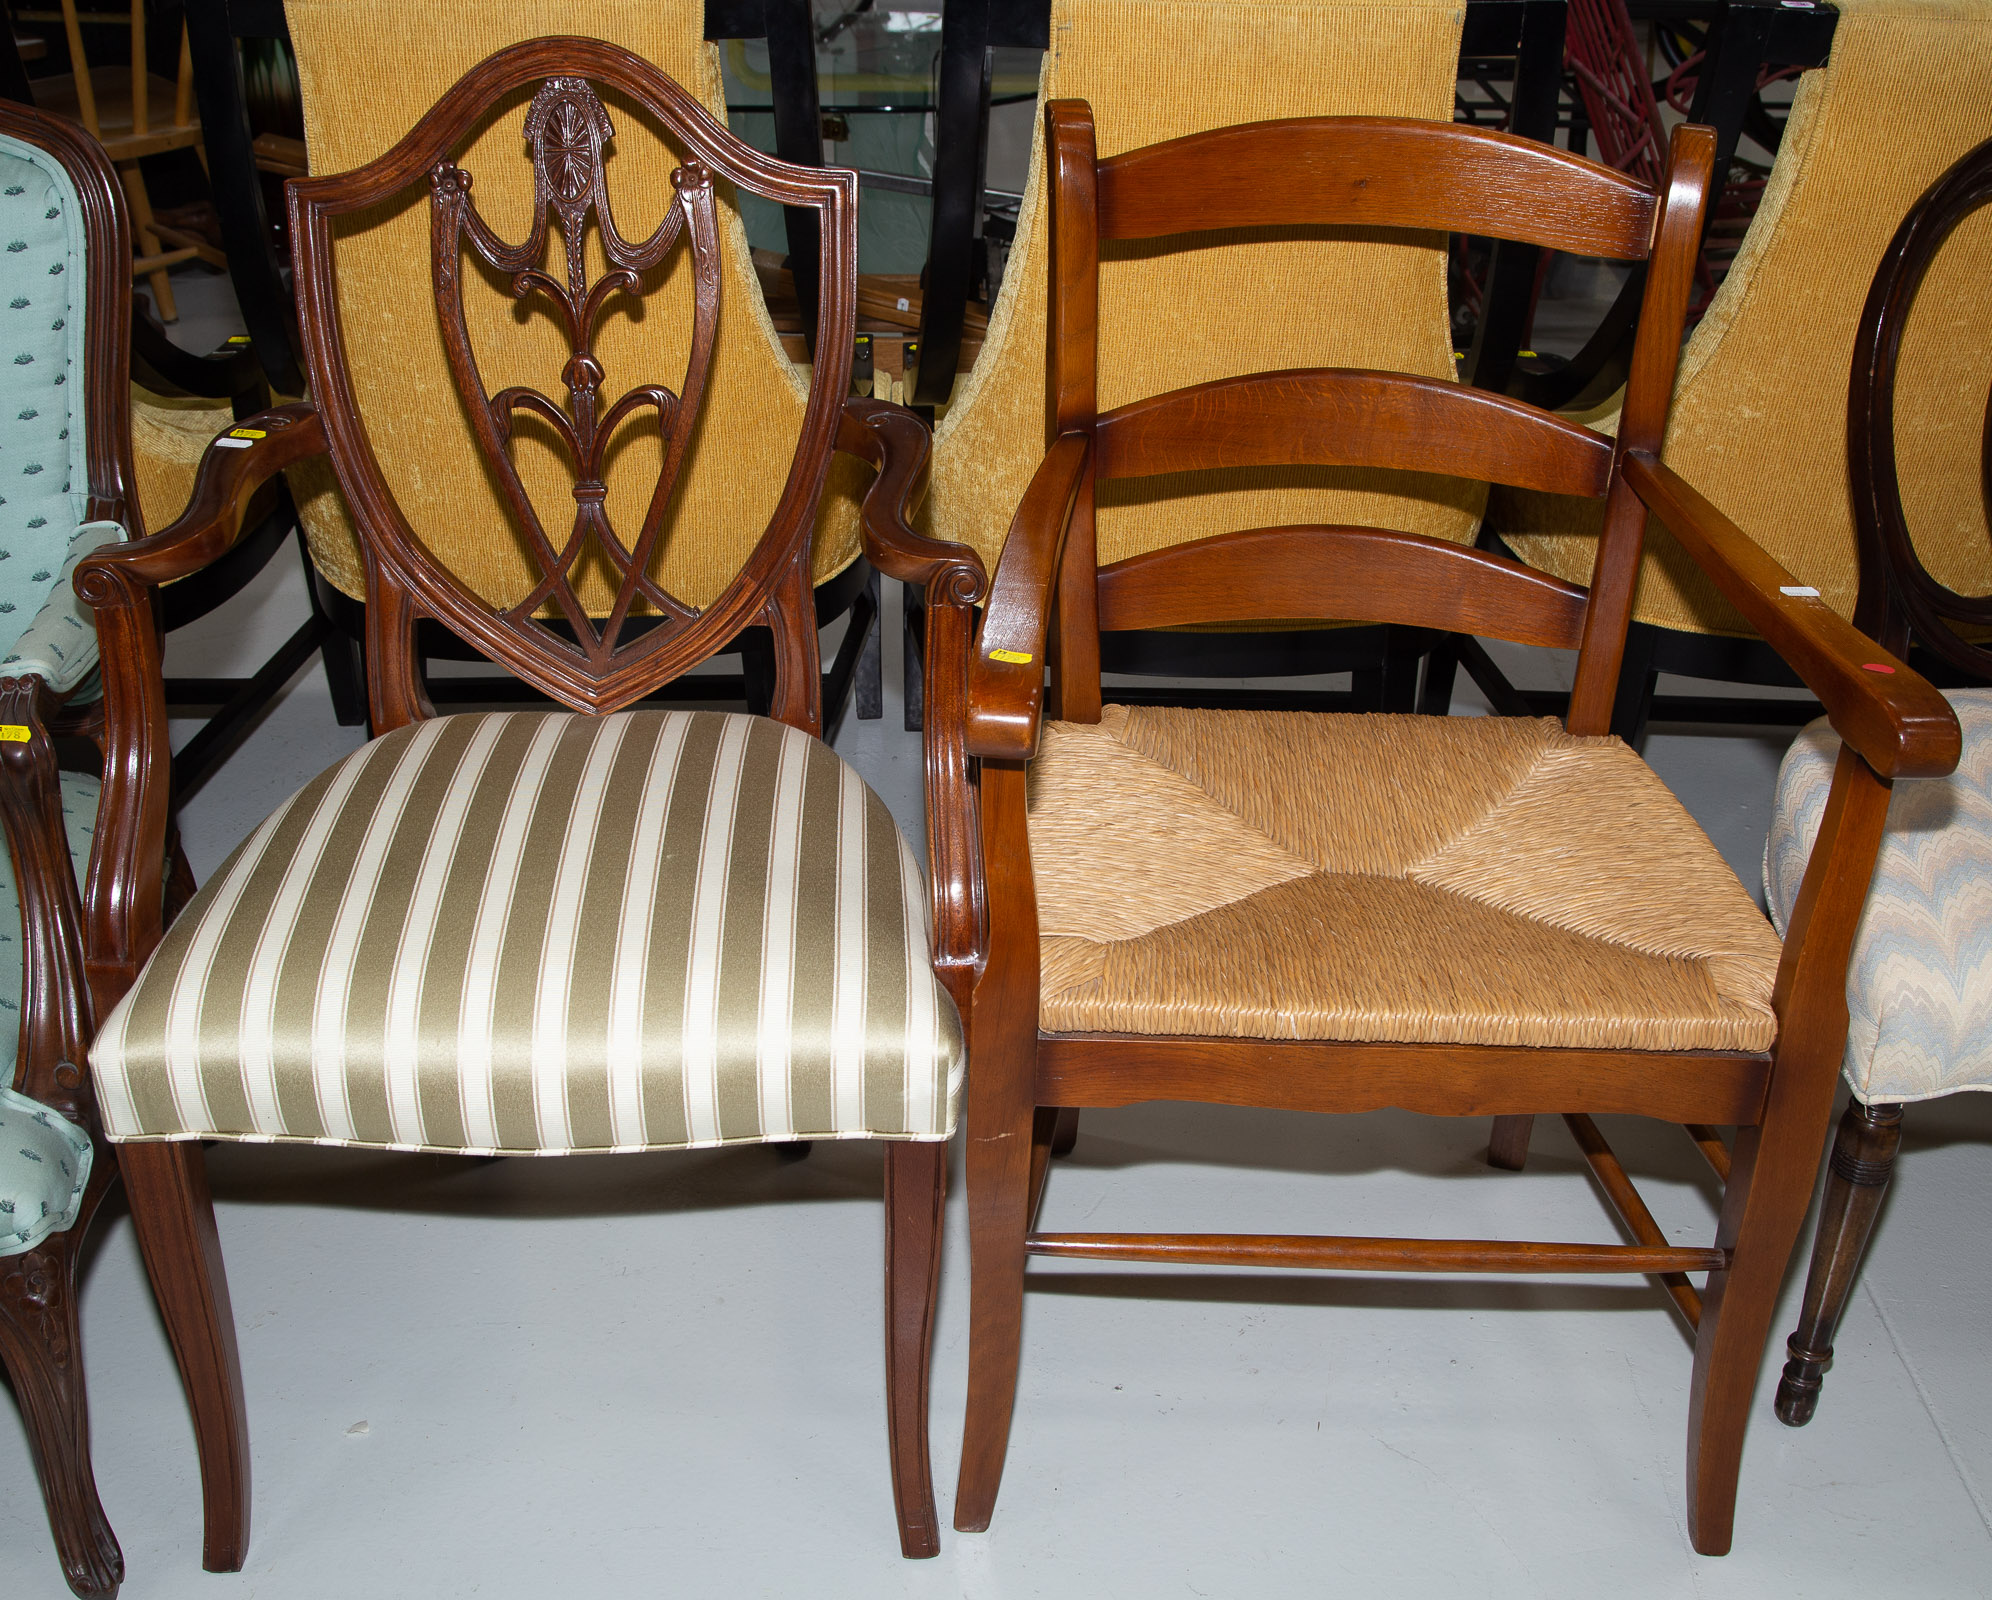 TWO ARM CHAIRS Including a vernacular 33778c